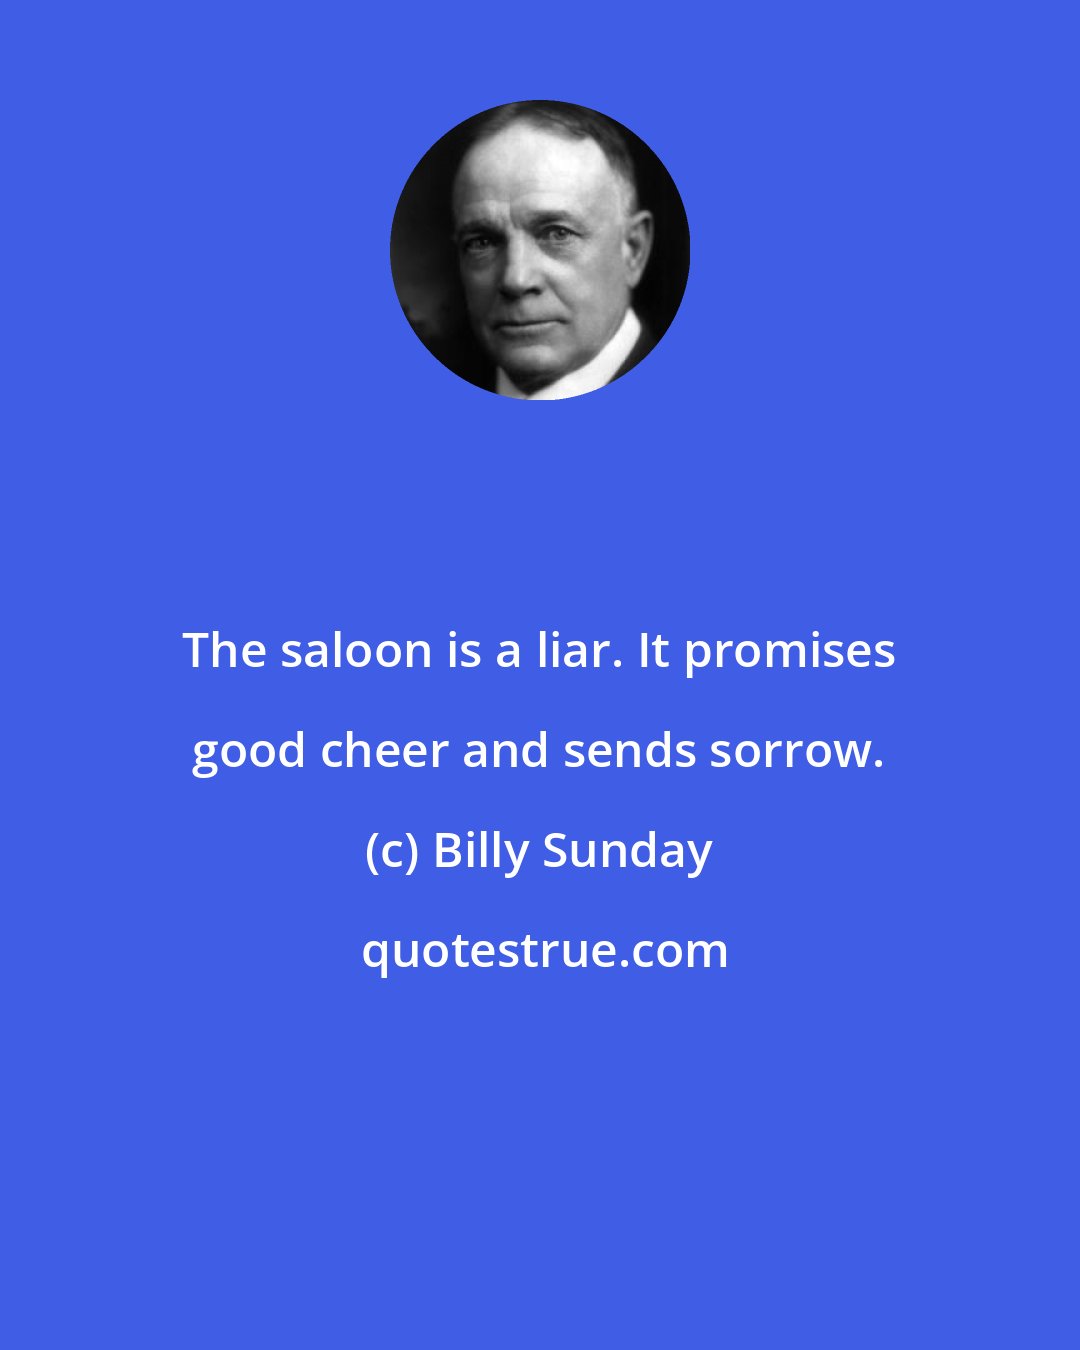 Billy Sunday: The saloon is a liar. It promises good cheer and sends sorrow.